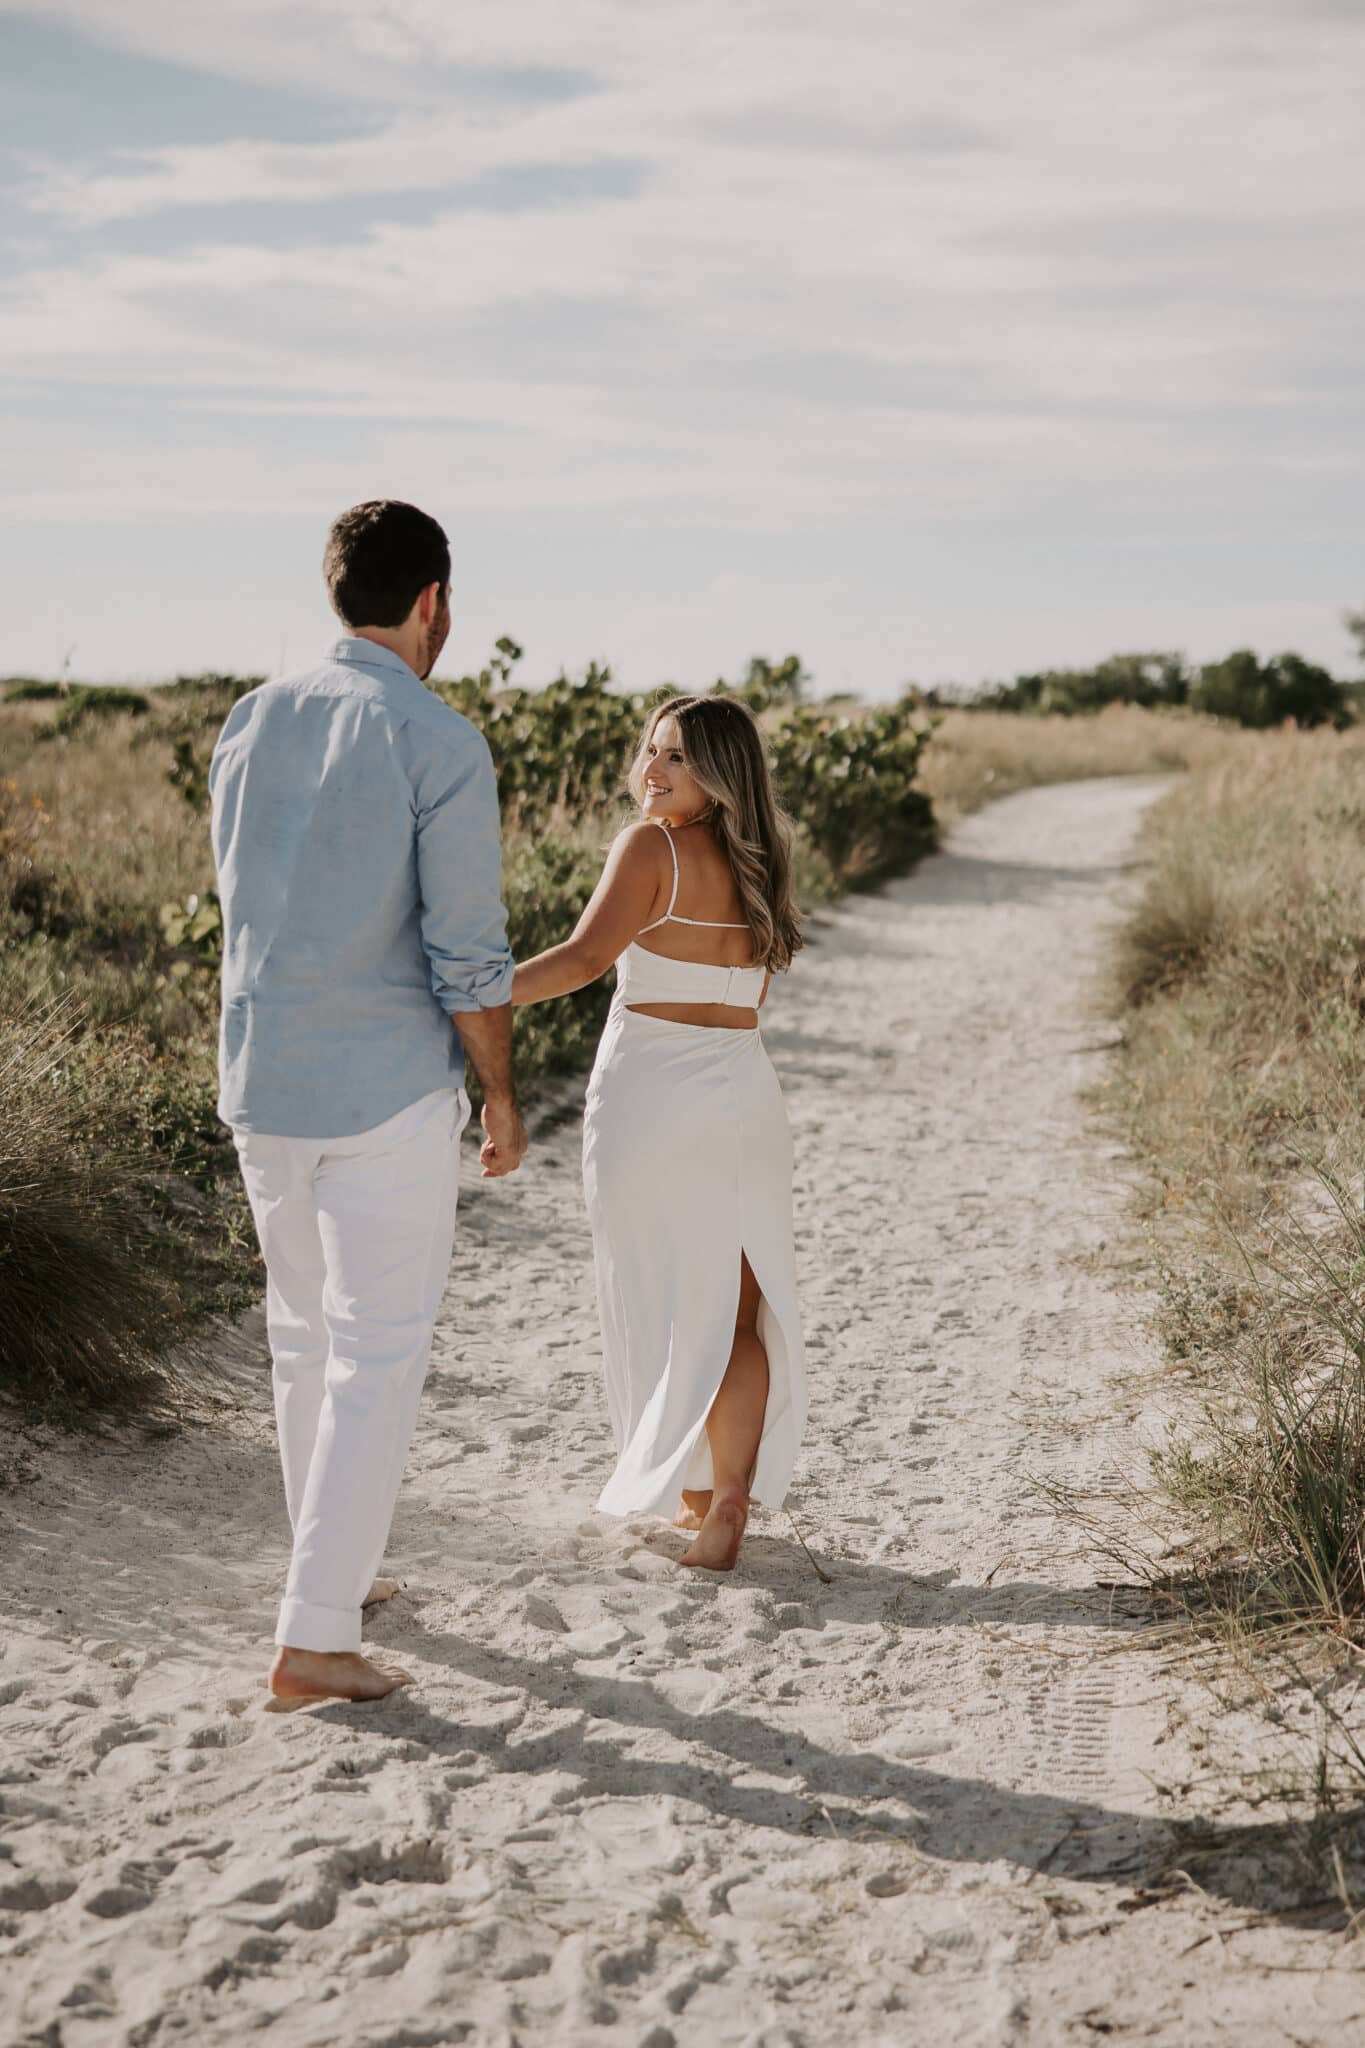 woman walks along sandy path in white dress while looking back at man walking behind her